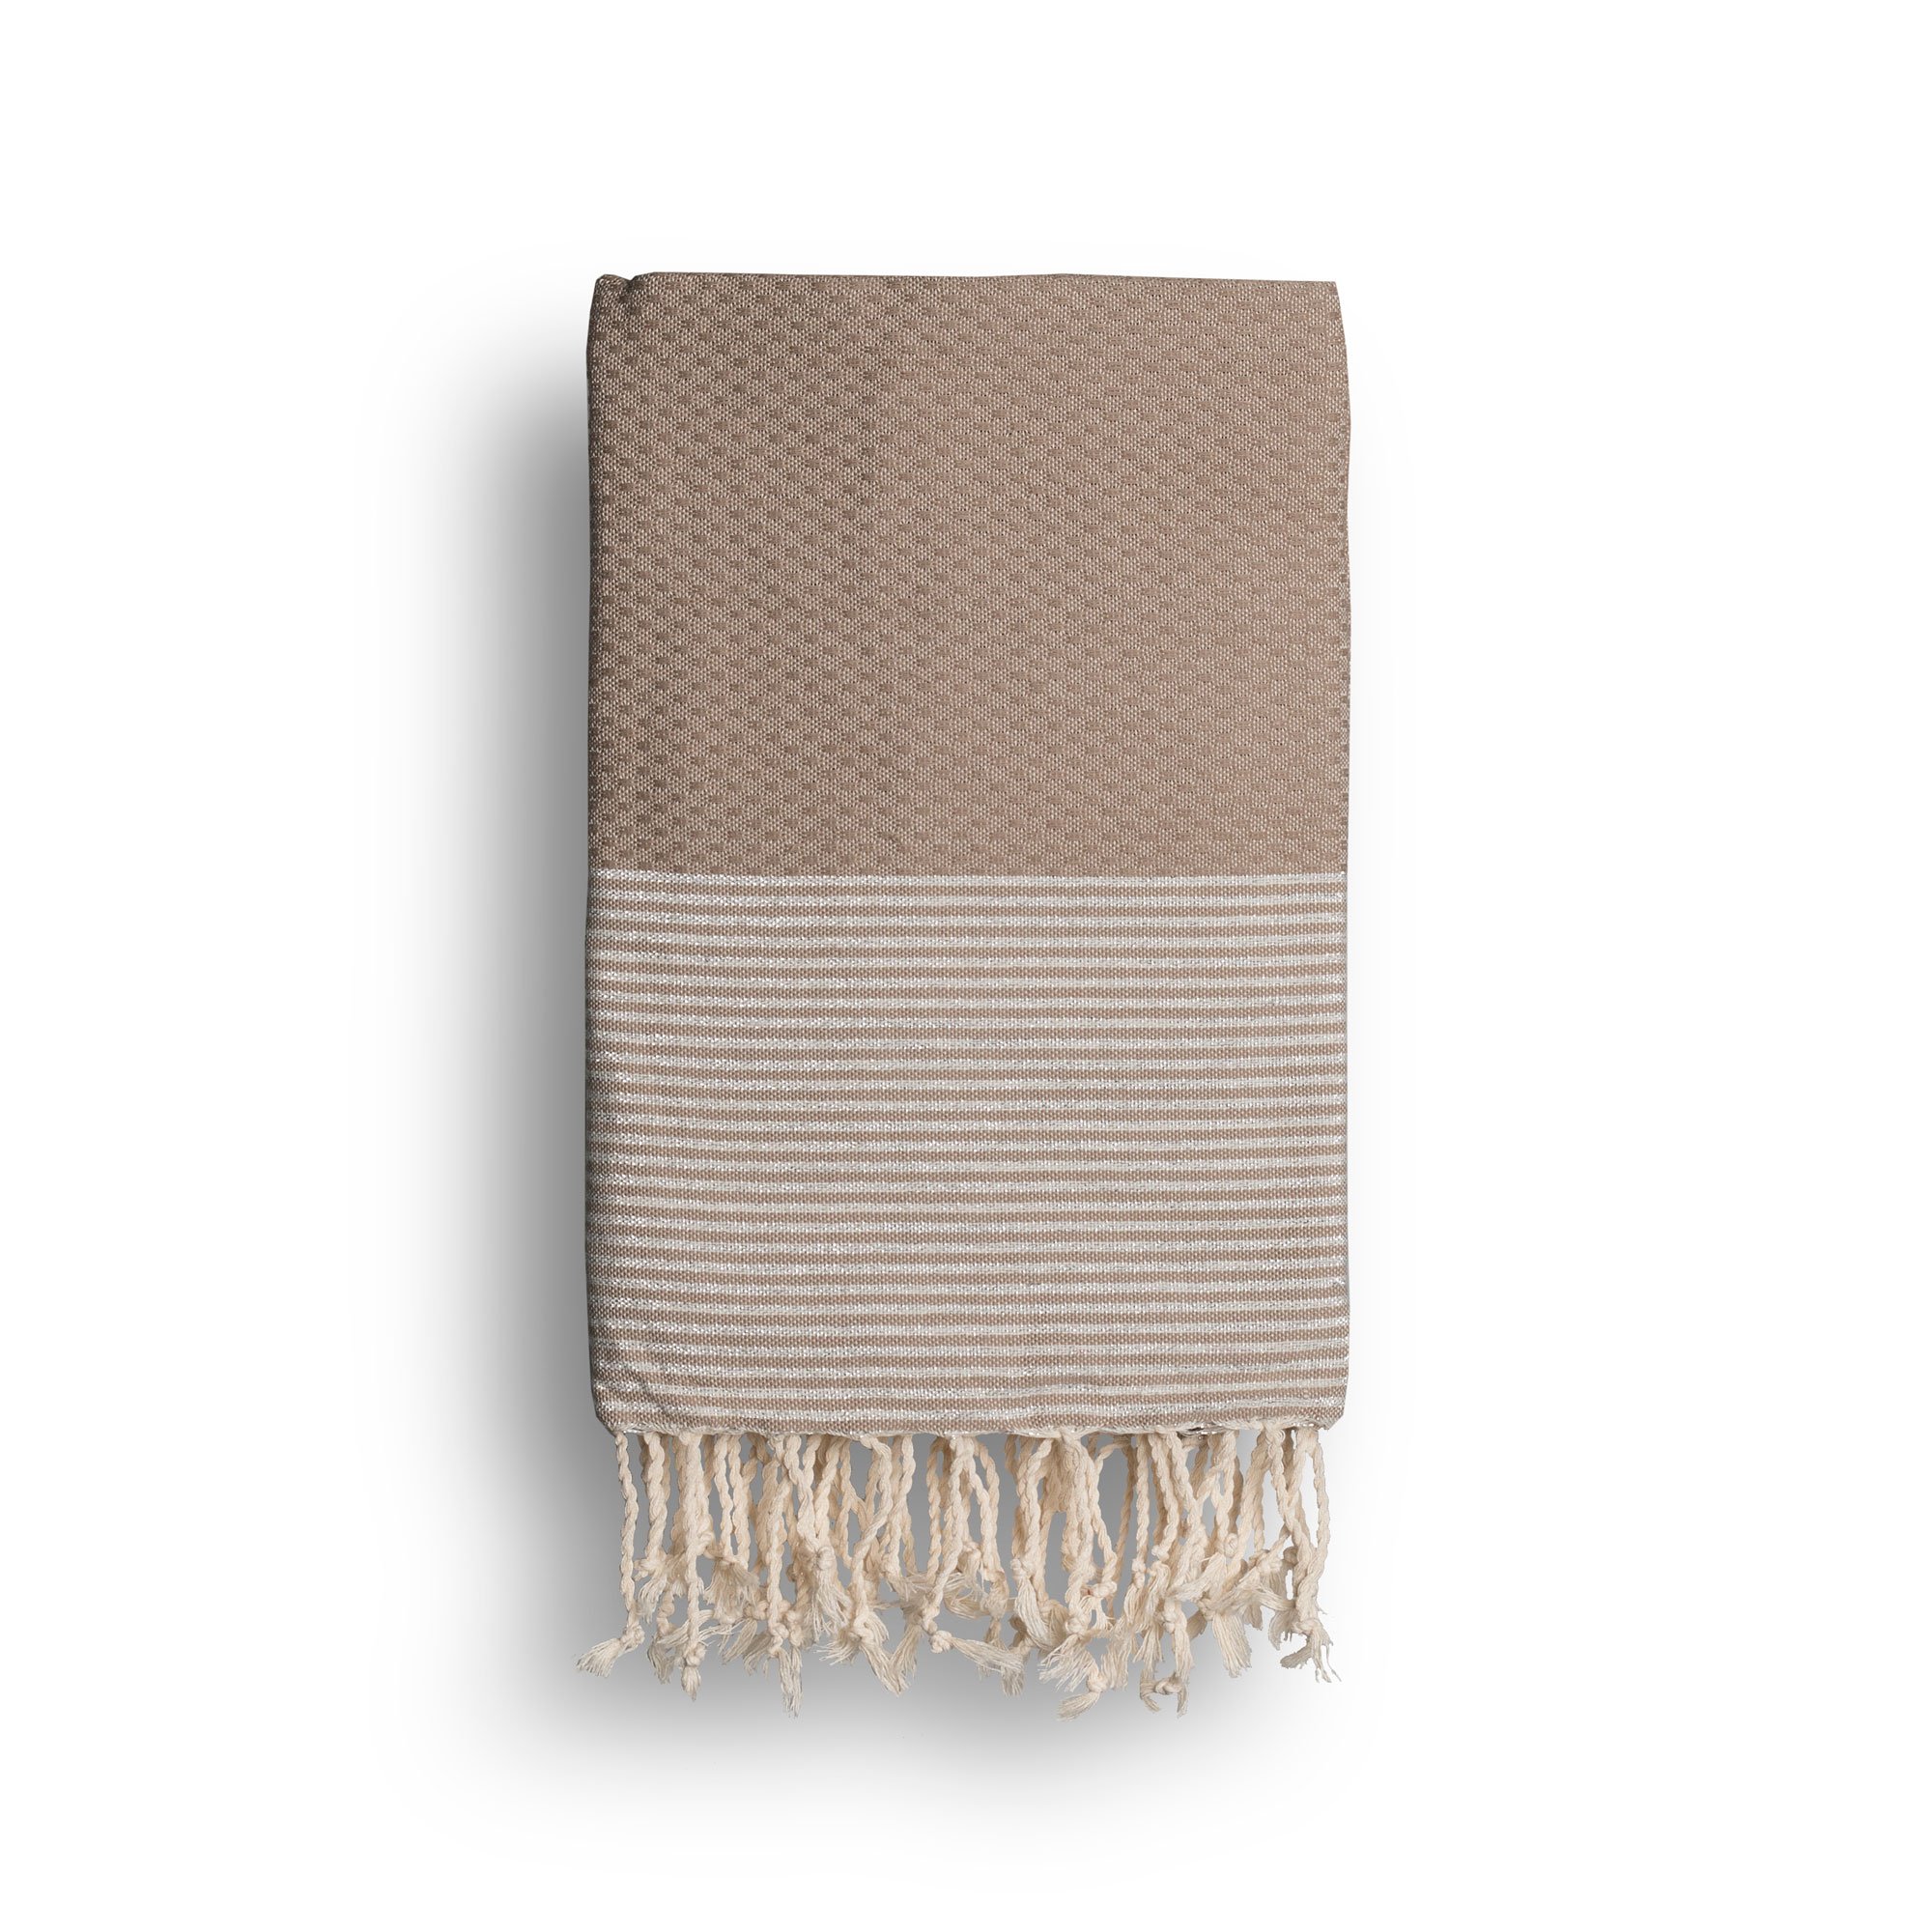 Cool-Fouta Hammam Towel Warm Taupe Honeycomb Fouta With Silver Lurex Stripes